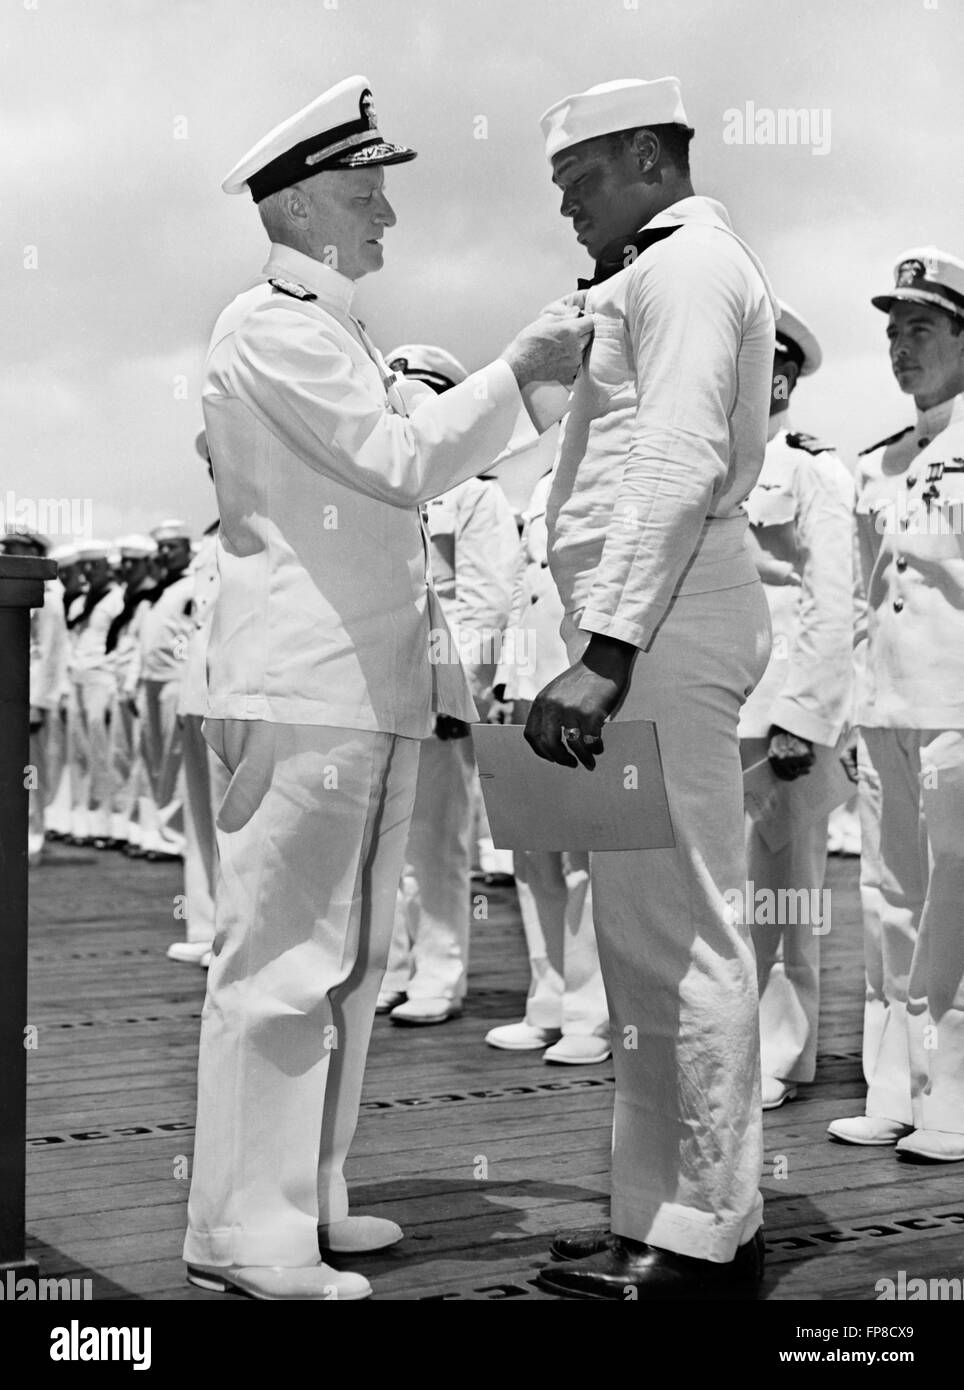 Admiral Chester W. Nimitz, Commander-in-Chief, Pacific Fleet, pinning the Navy Cross on Doris 'Dorie' Miller, Steward's Mate 1/c, at a ceremony on board a U.S. Navy warship in Pearl Harbor, on May 27, 1942. Miller got the Navy Cross for his bravery during the attack on Pearl Harbor on December 7, 1941 and was the first black American to receive the award. Official US Navy Photo. Stock Photo